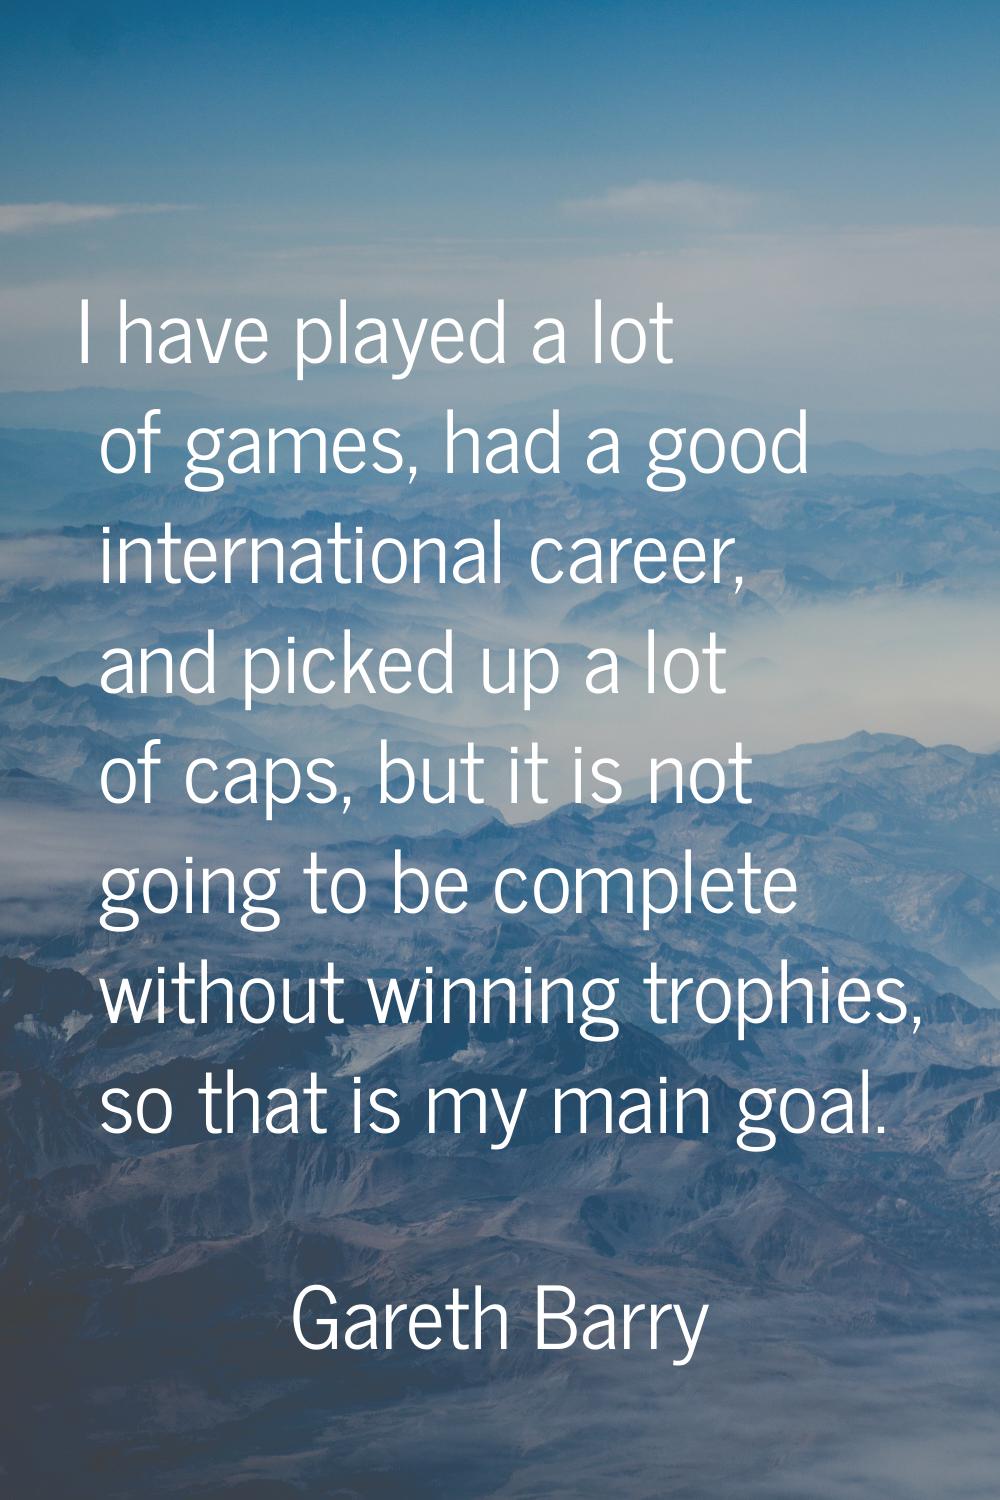 I have played a lot of games, had a good international career, and picked up a lot of caps, but it 